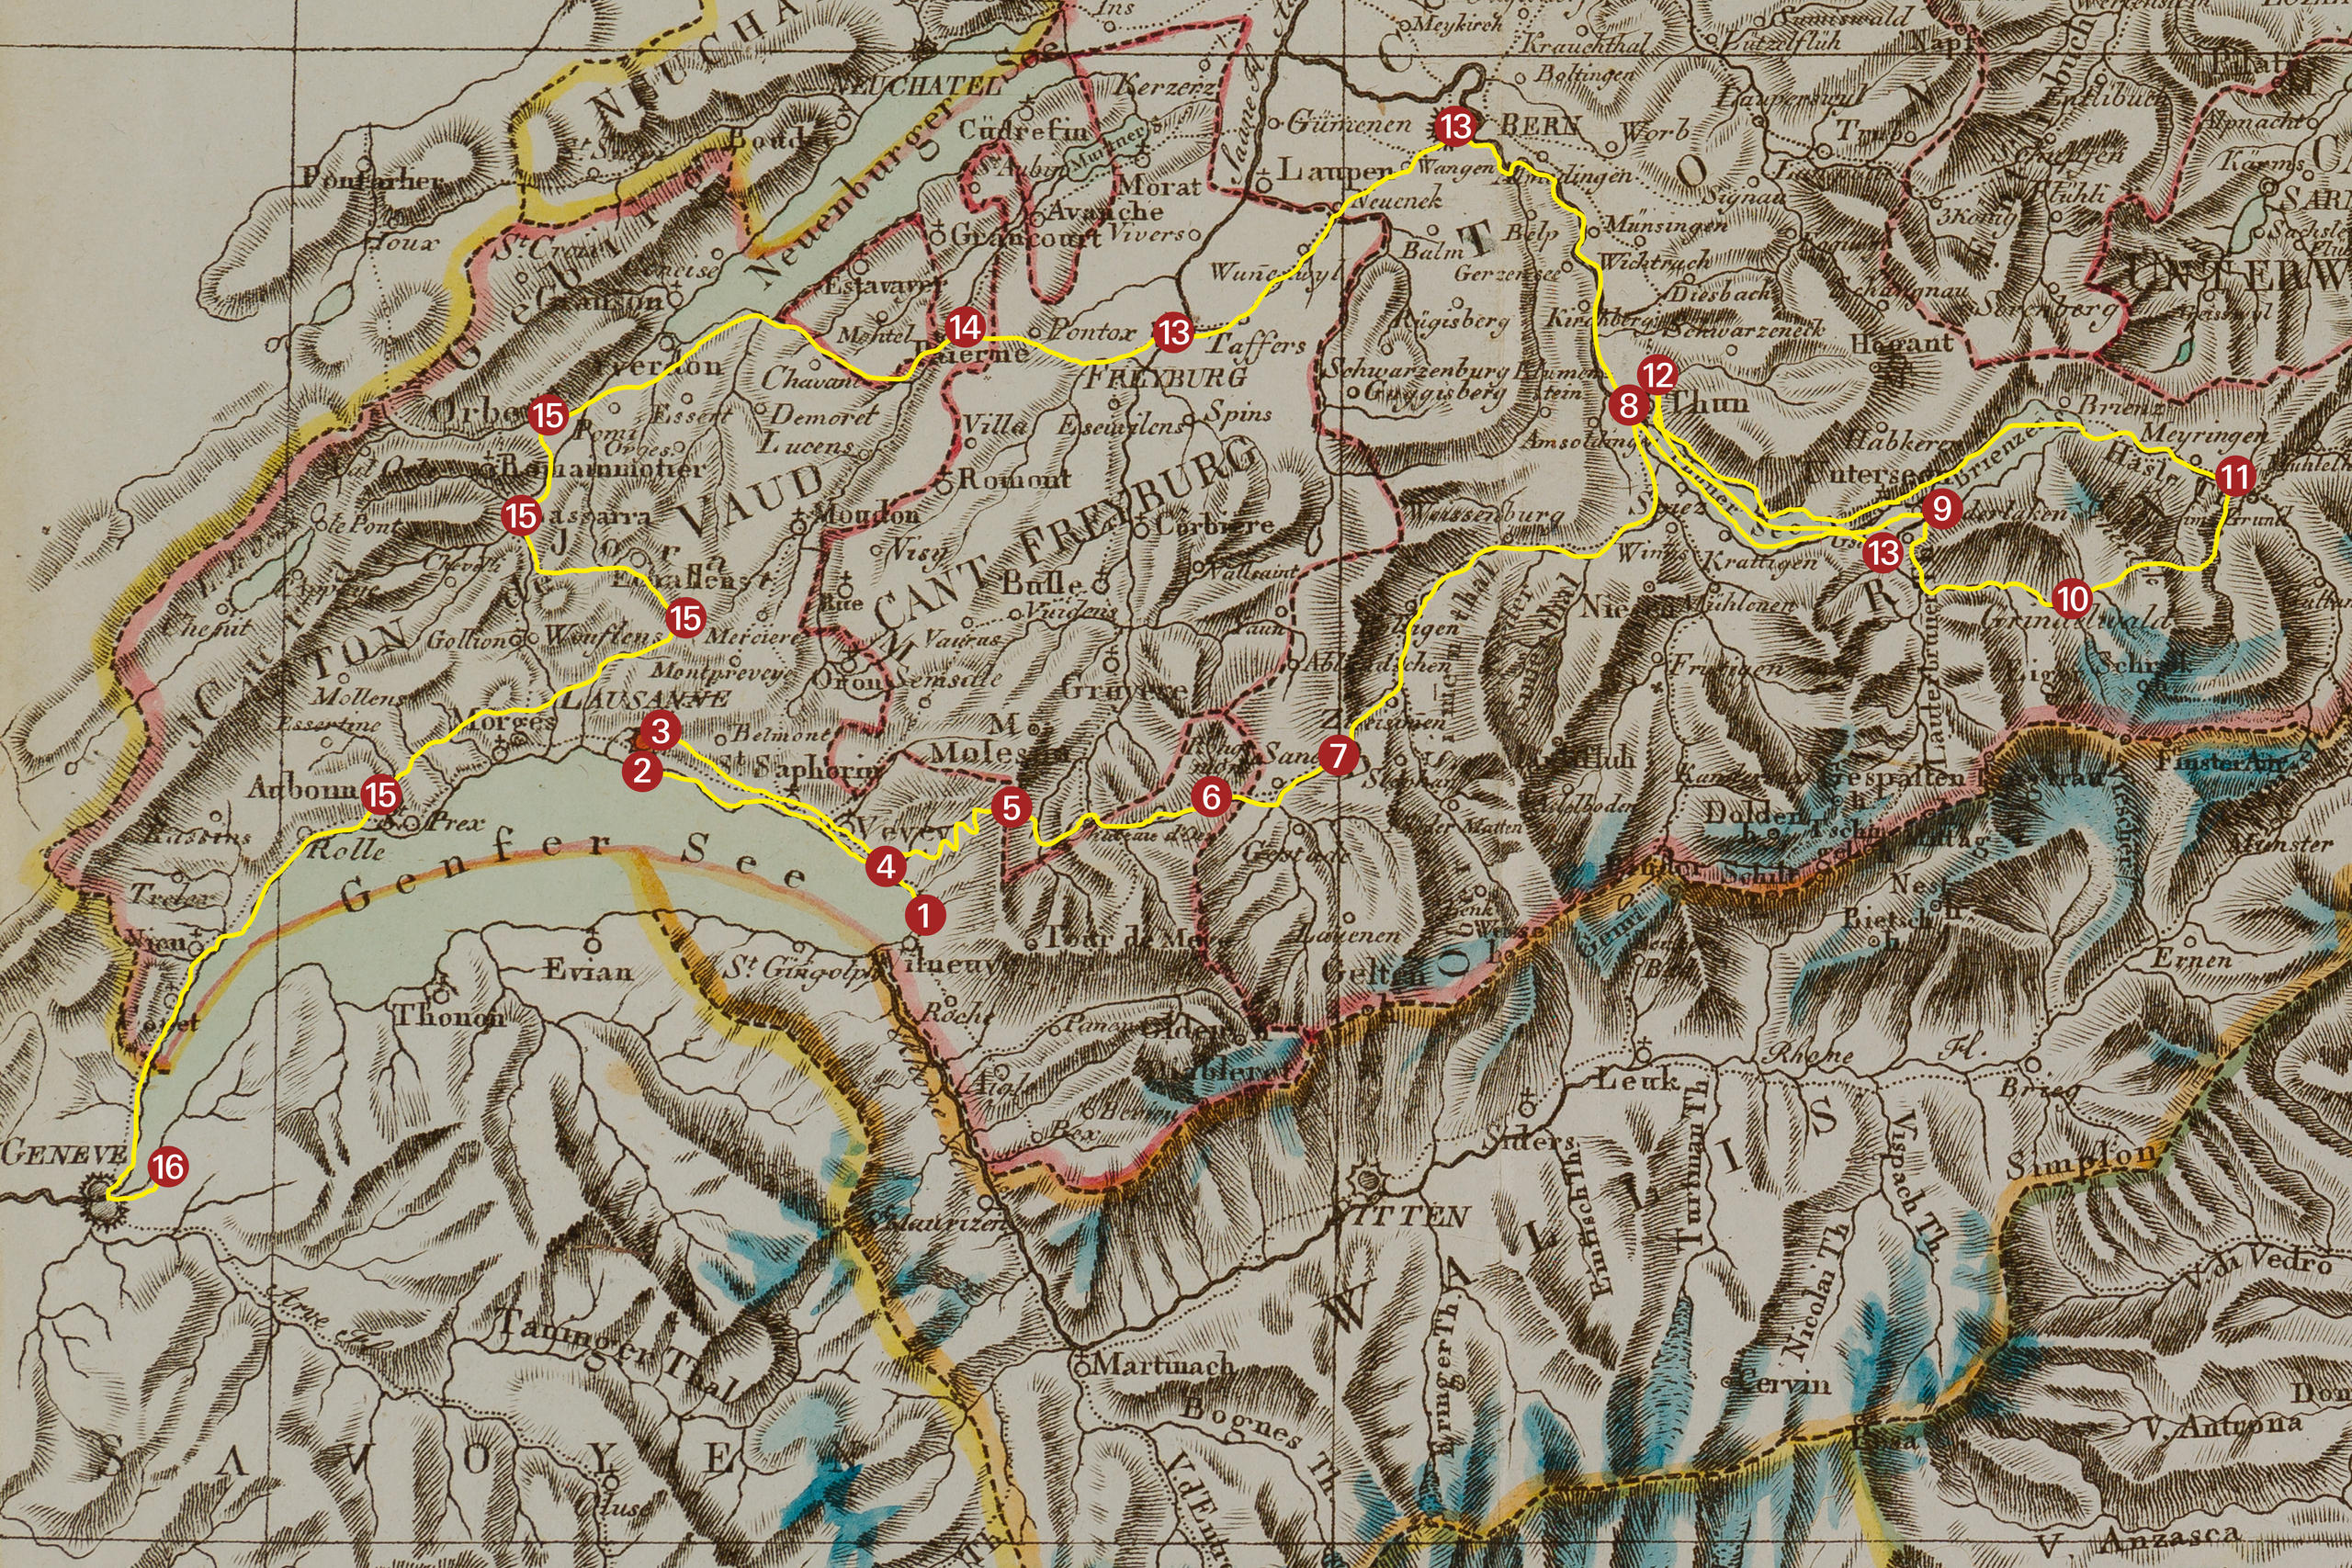 A map showing route 33 from 'The Traveller's Guide through Switzerland (1810-11) 'guidebook by J. G. Ebel used by Byron